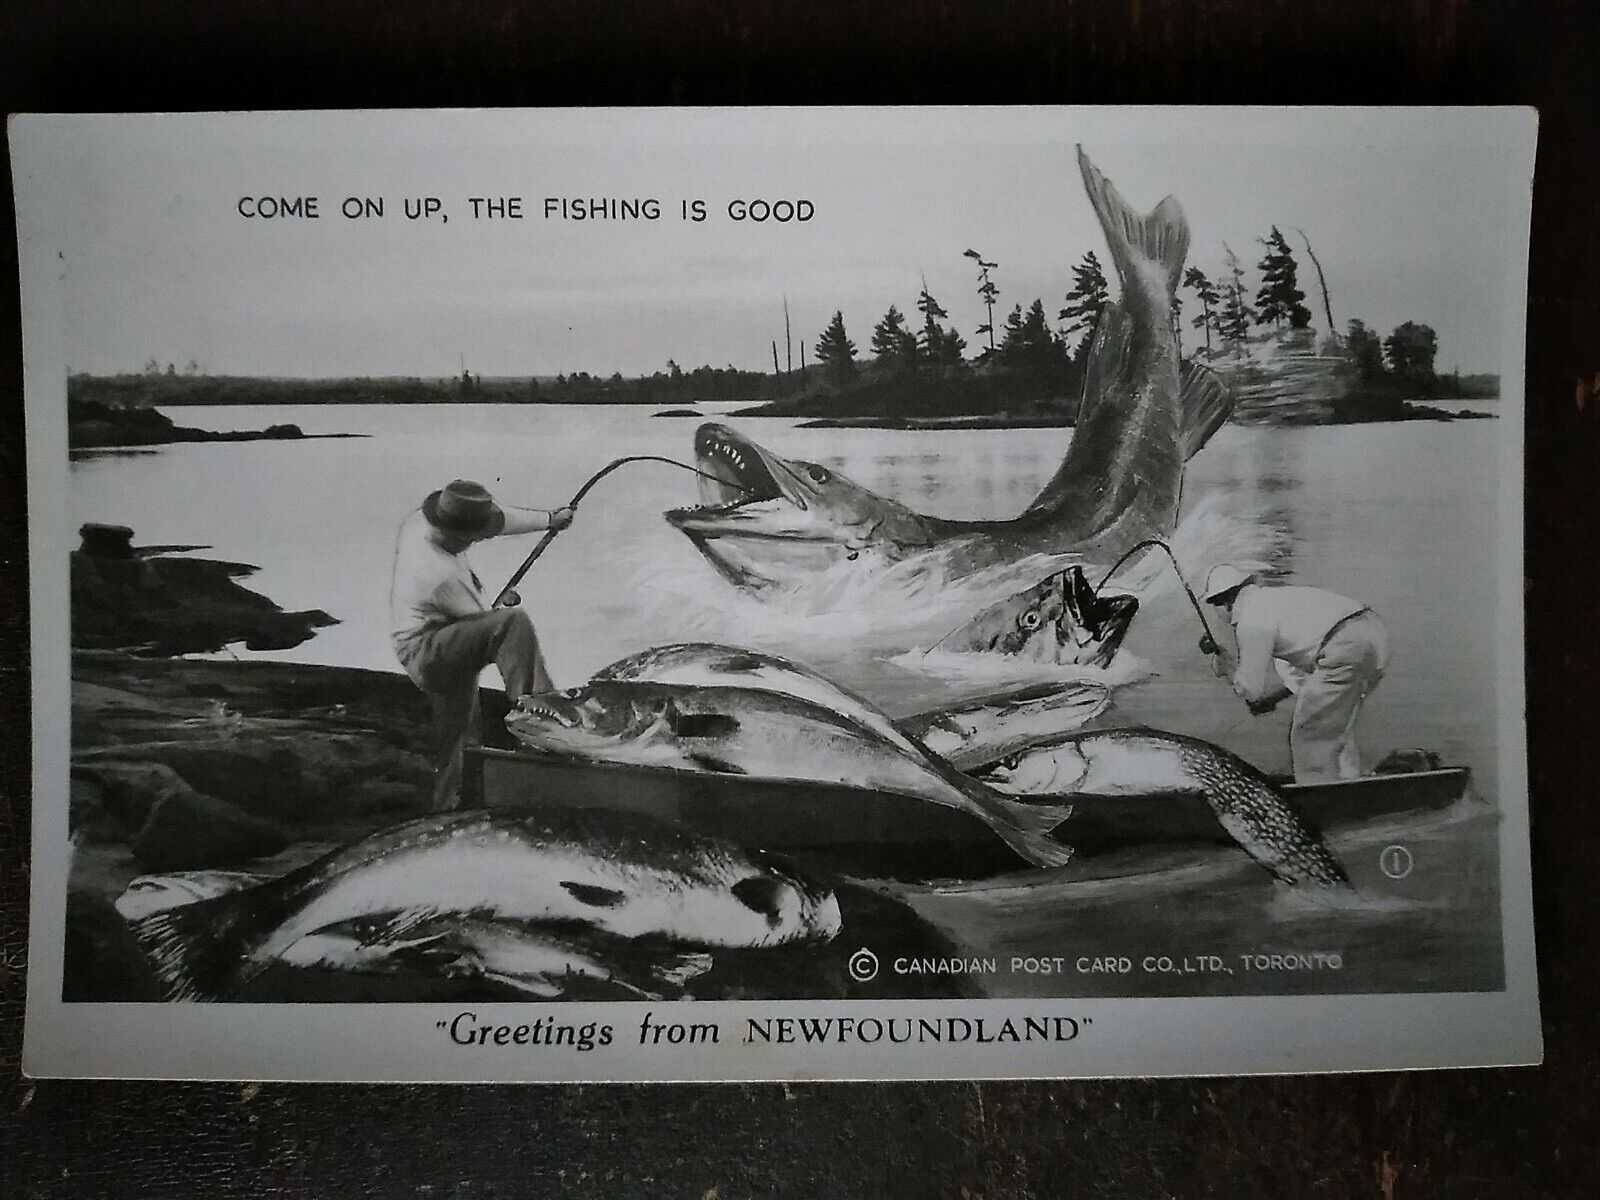 Come on Up, the Fishing is Good, Greetings from Newfoundland, CAN - Mid 1900s